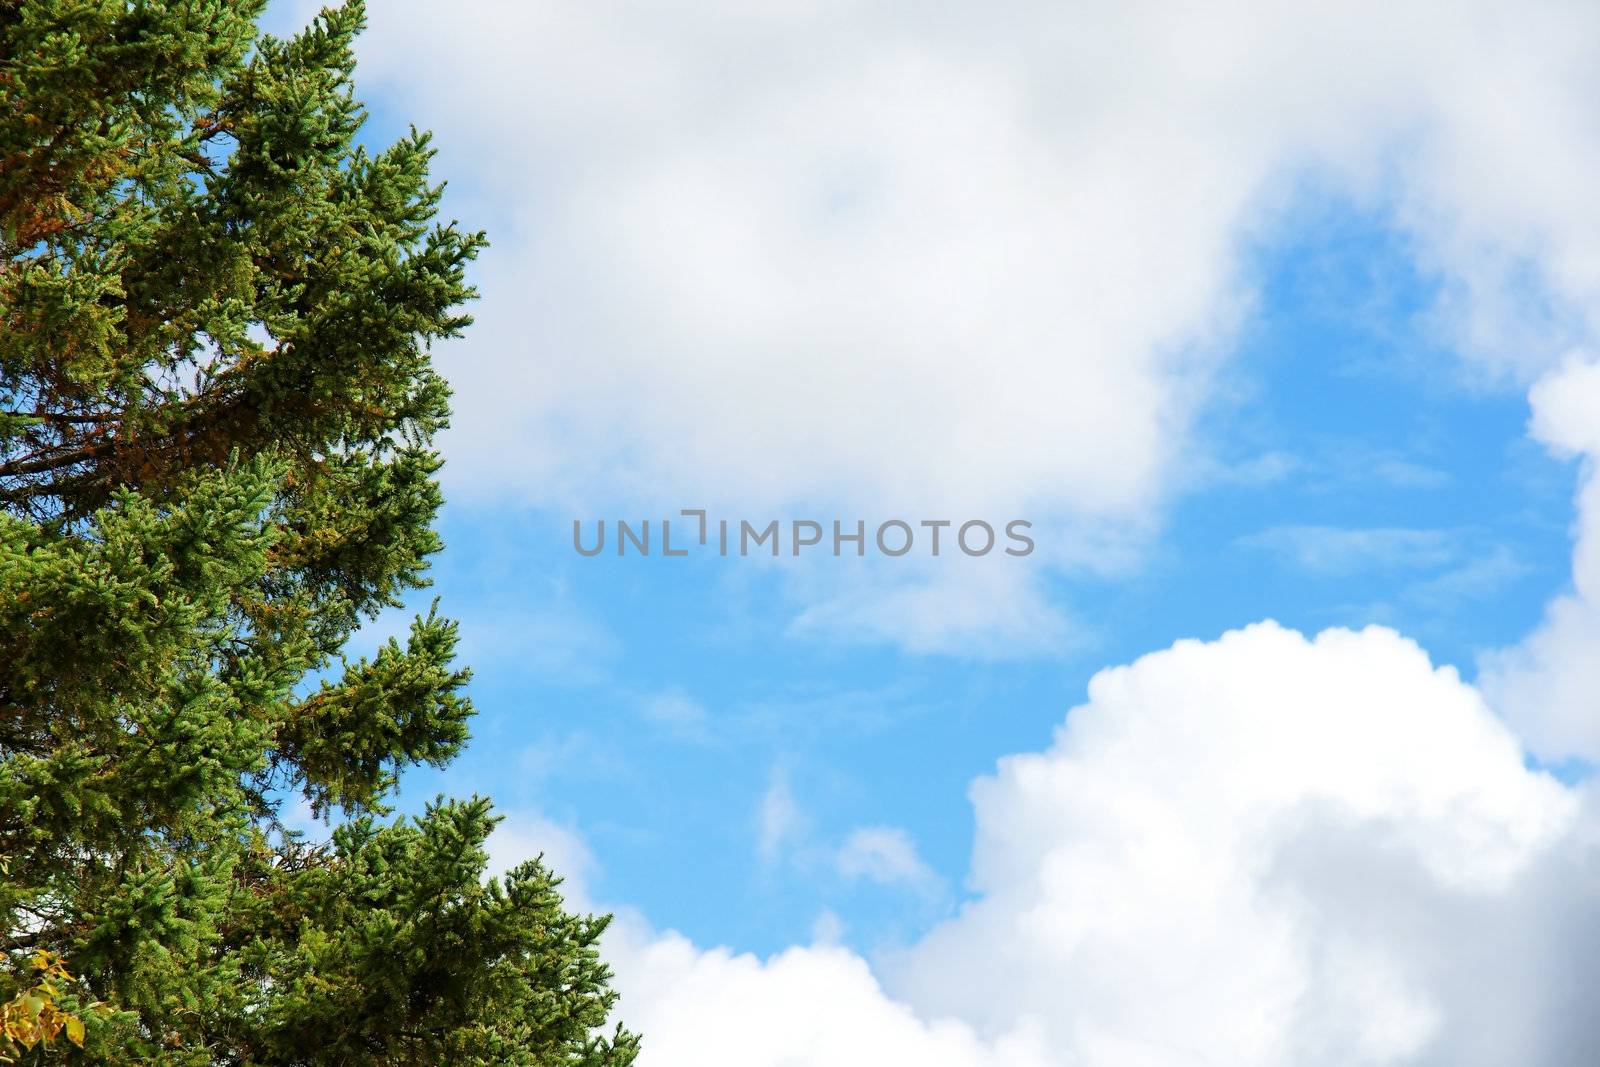 Beautiful sunny day with an evergreen tree contrasting the blue sky with white puffy clouds.